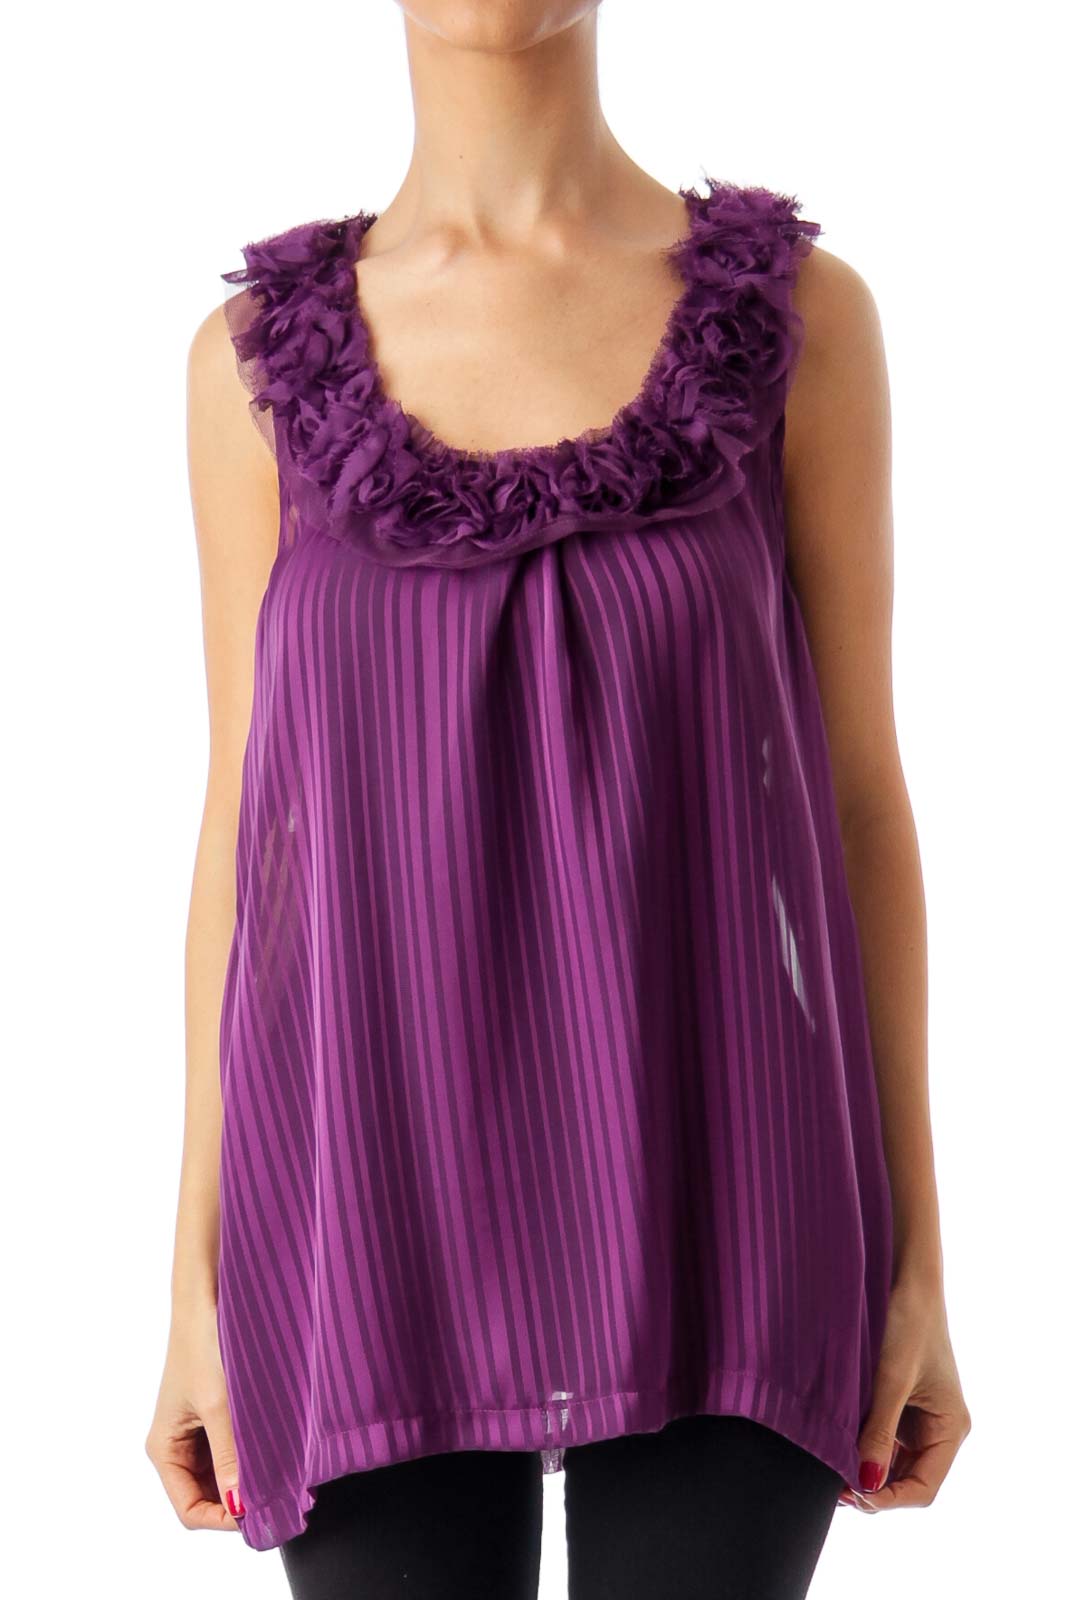 Purple See-Through Sleeveless Top Front